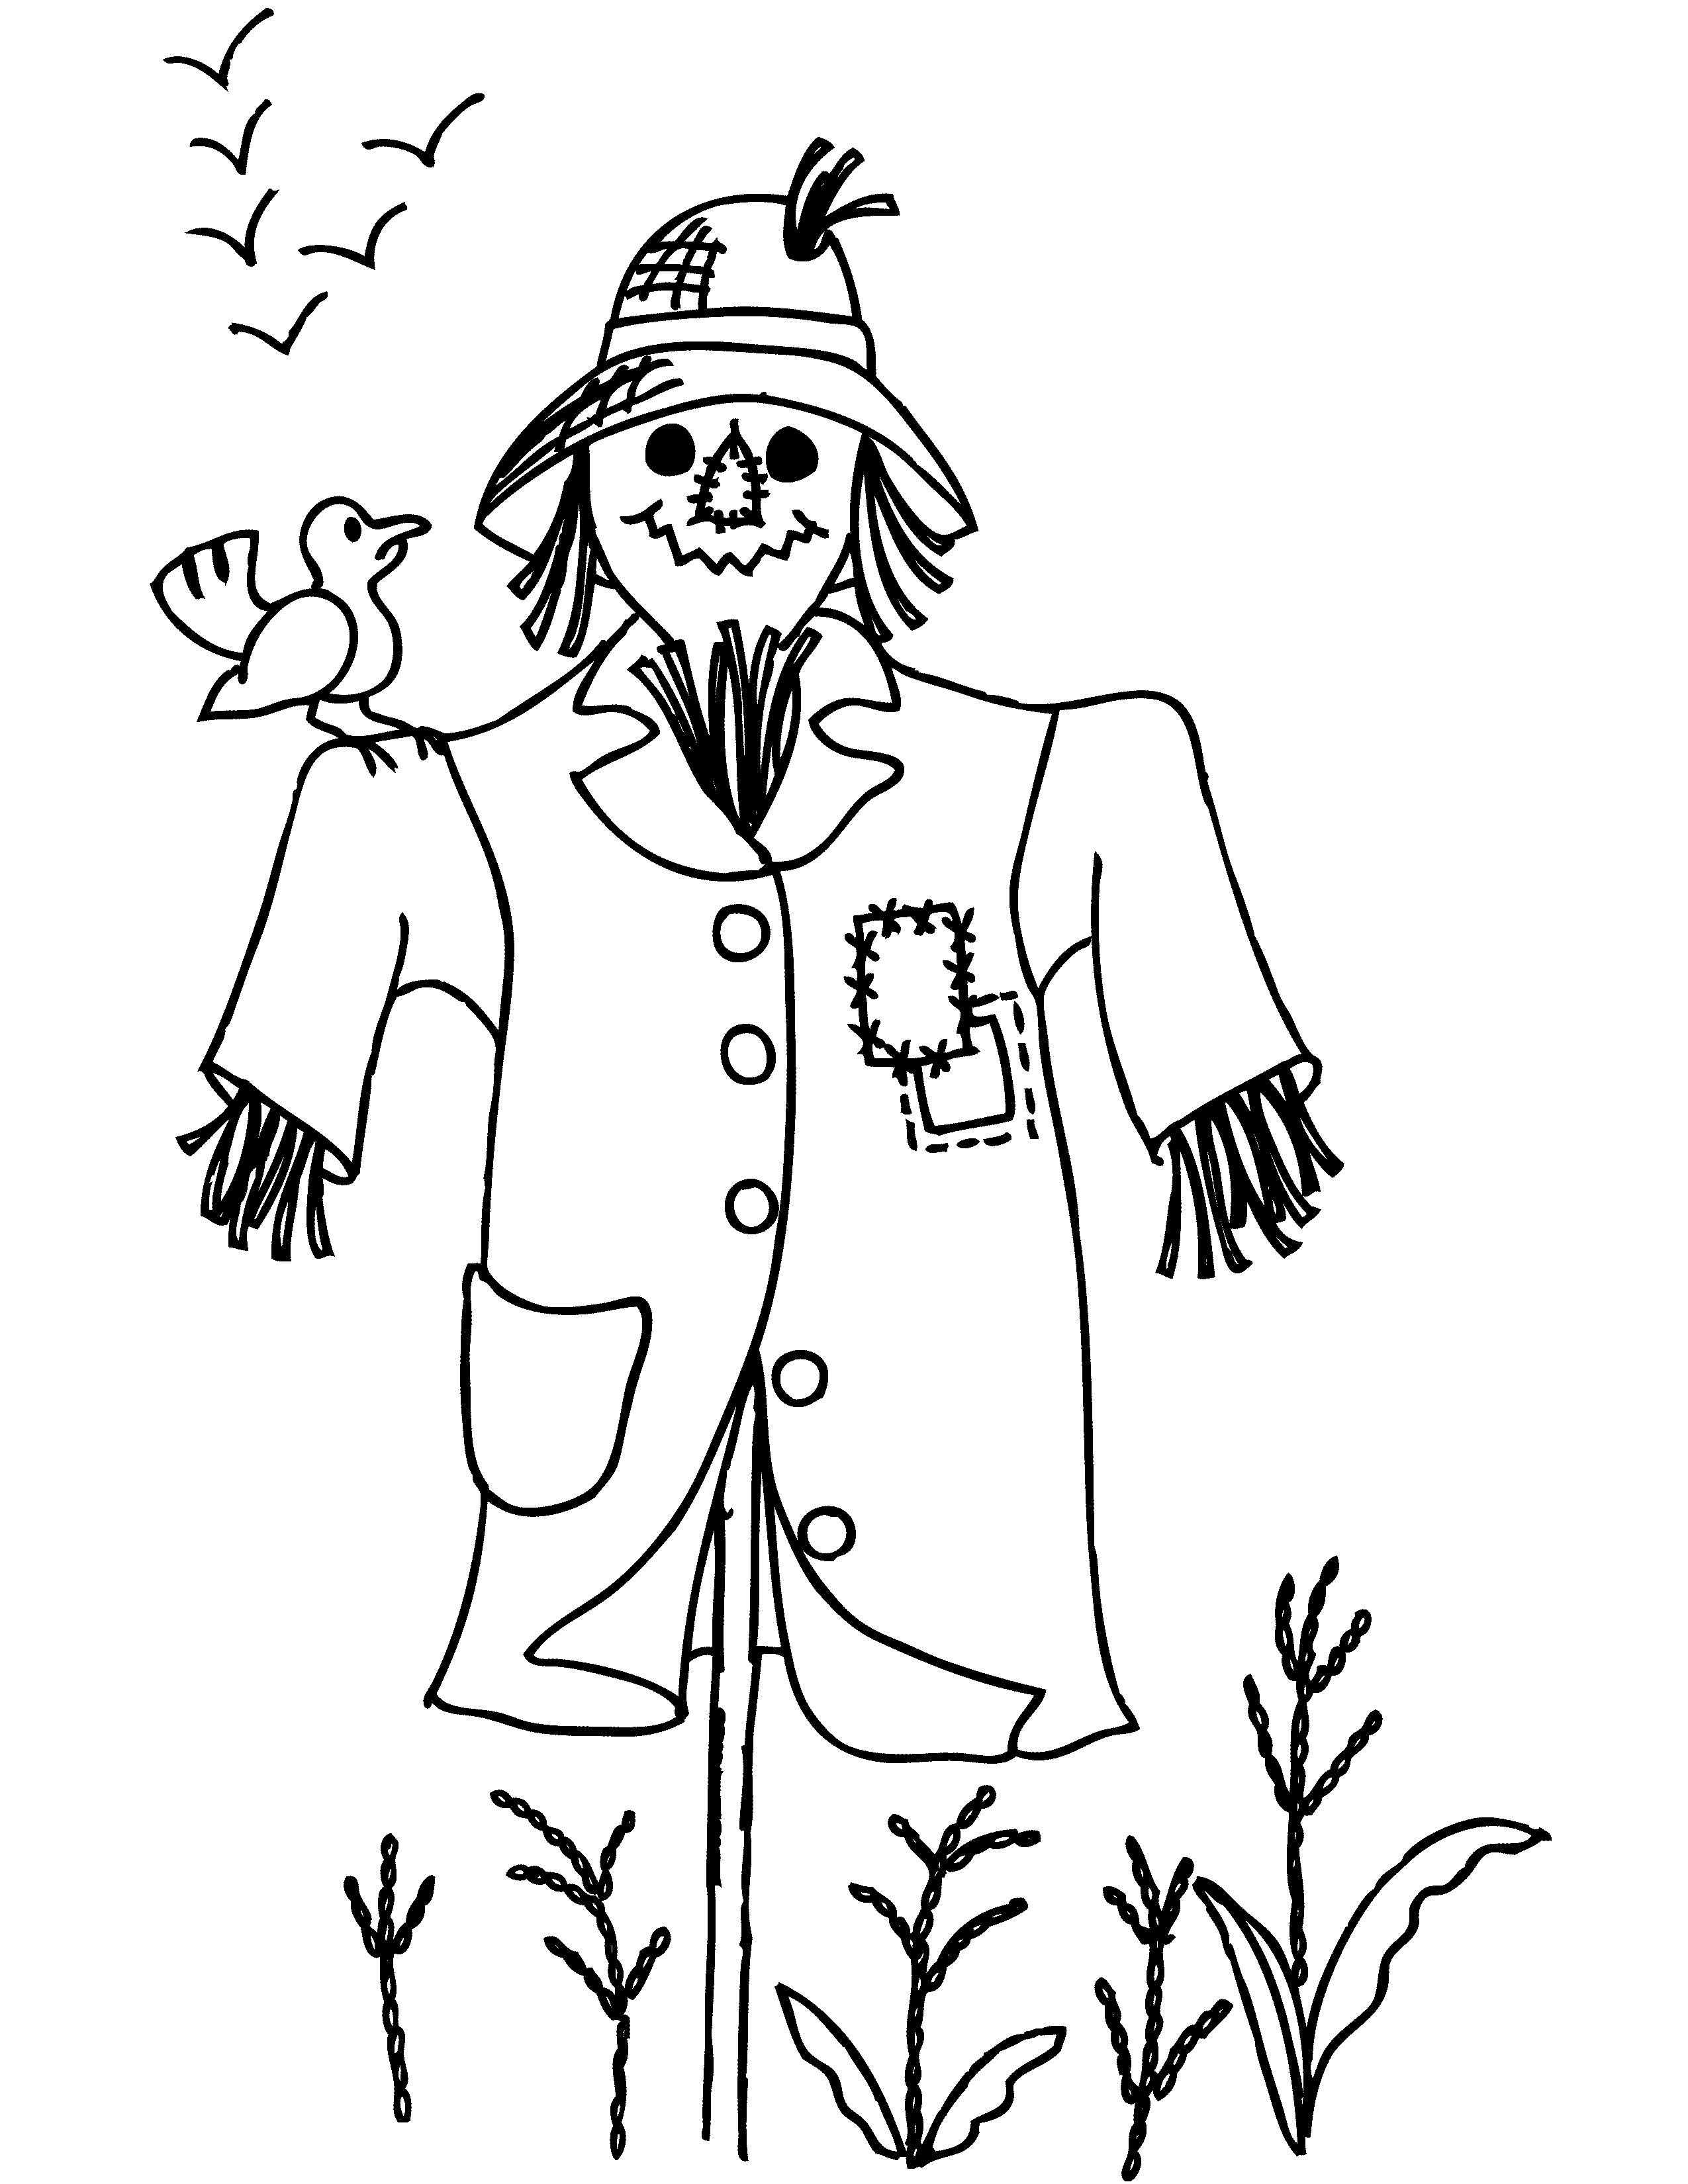 scarecrow coloring pages scarecrow coloring pages to download and print for free pages scarecrow coloring 